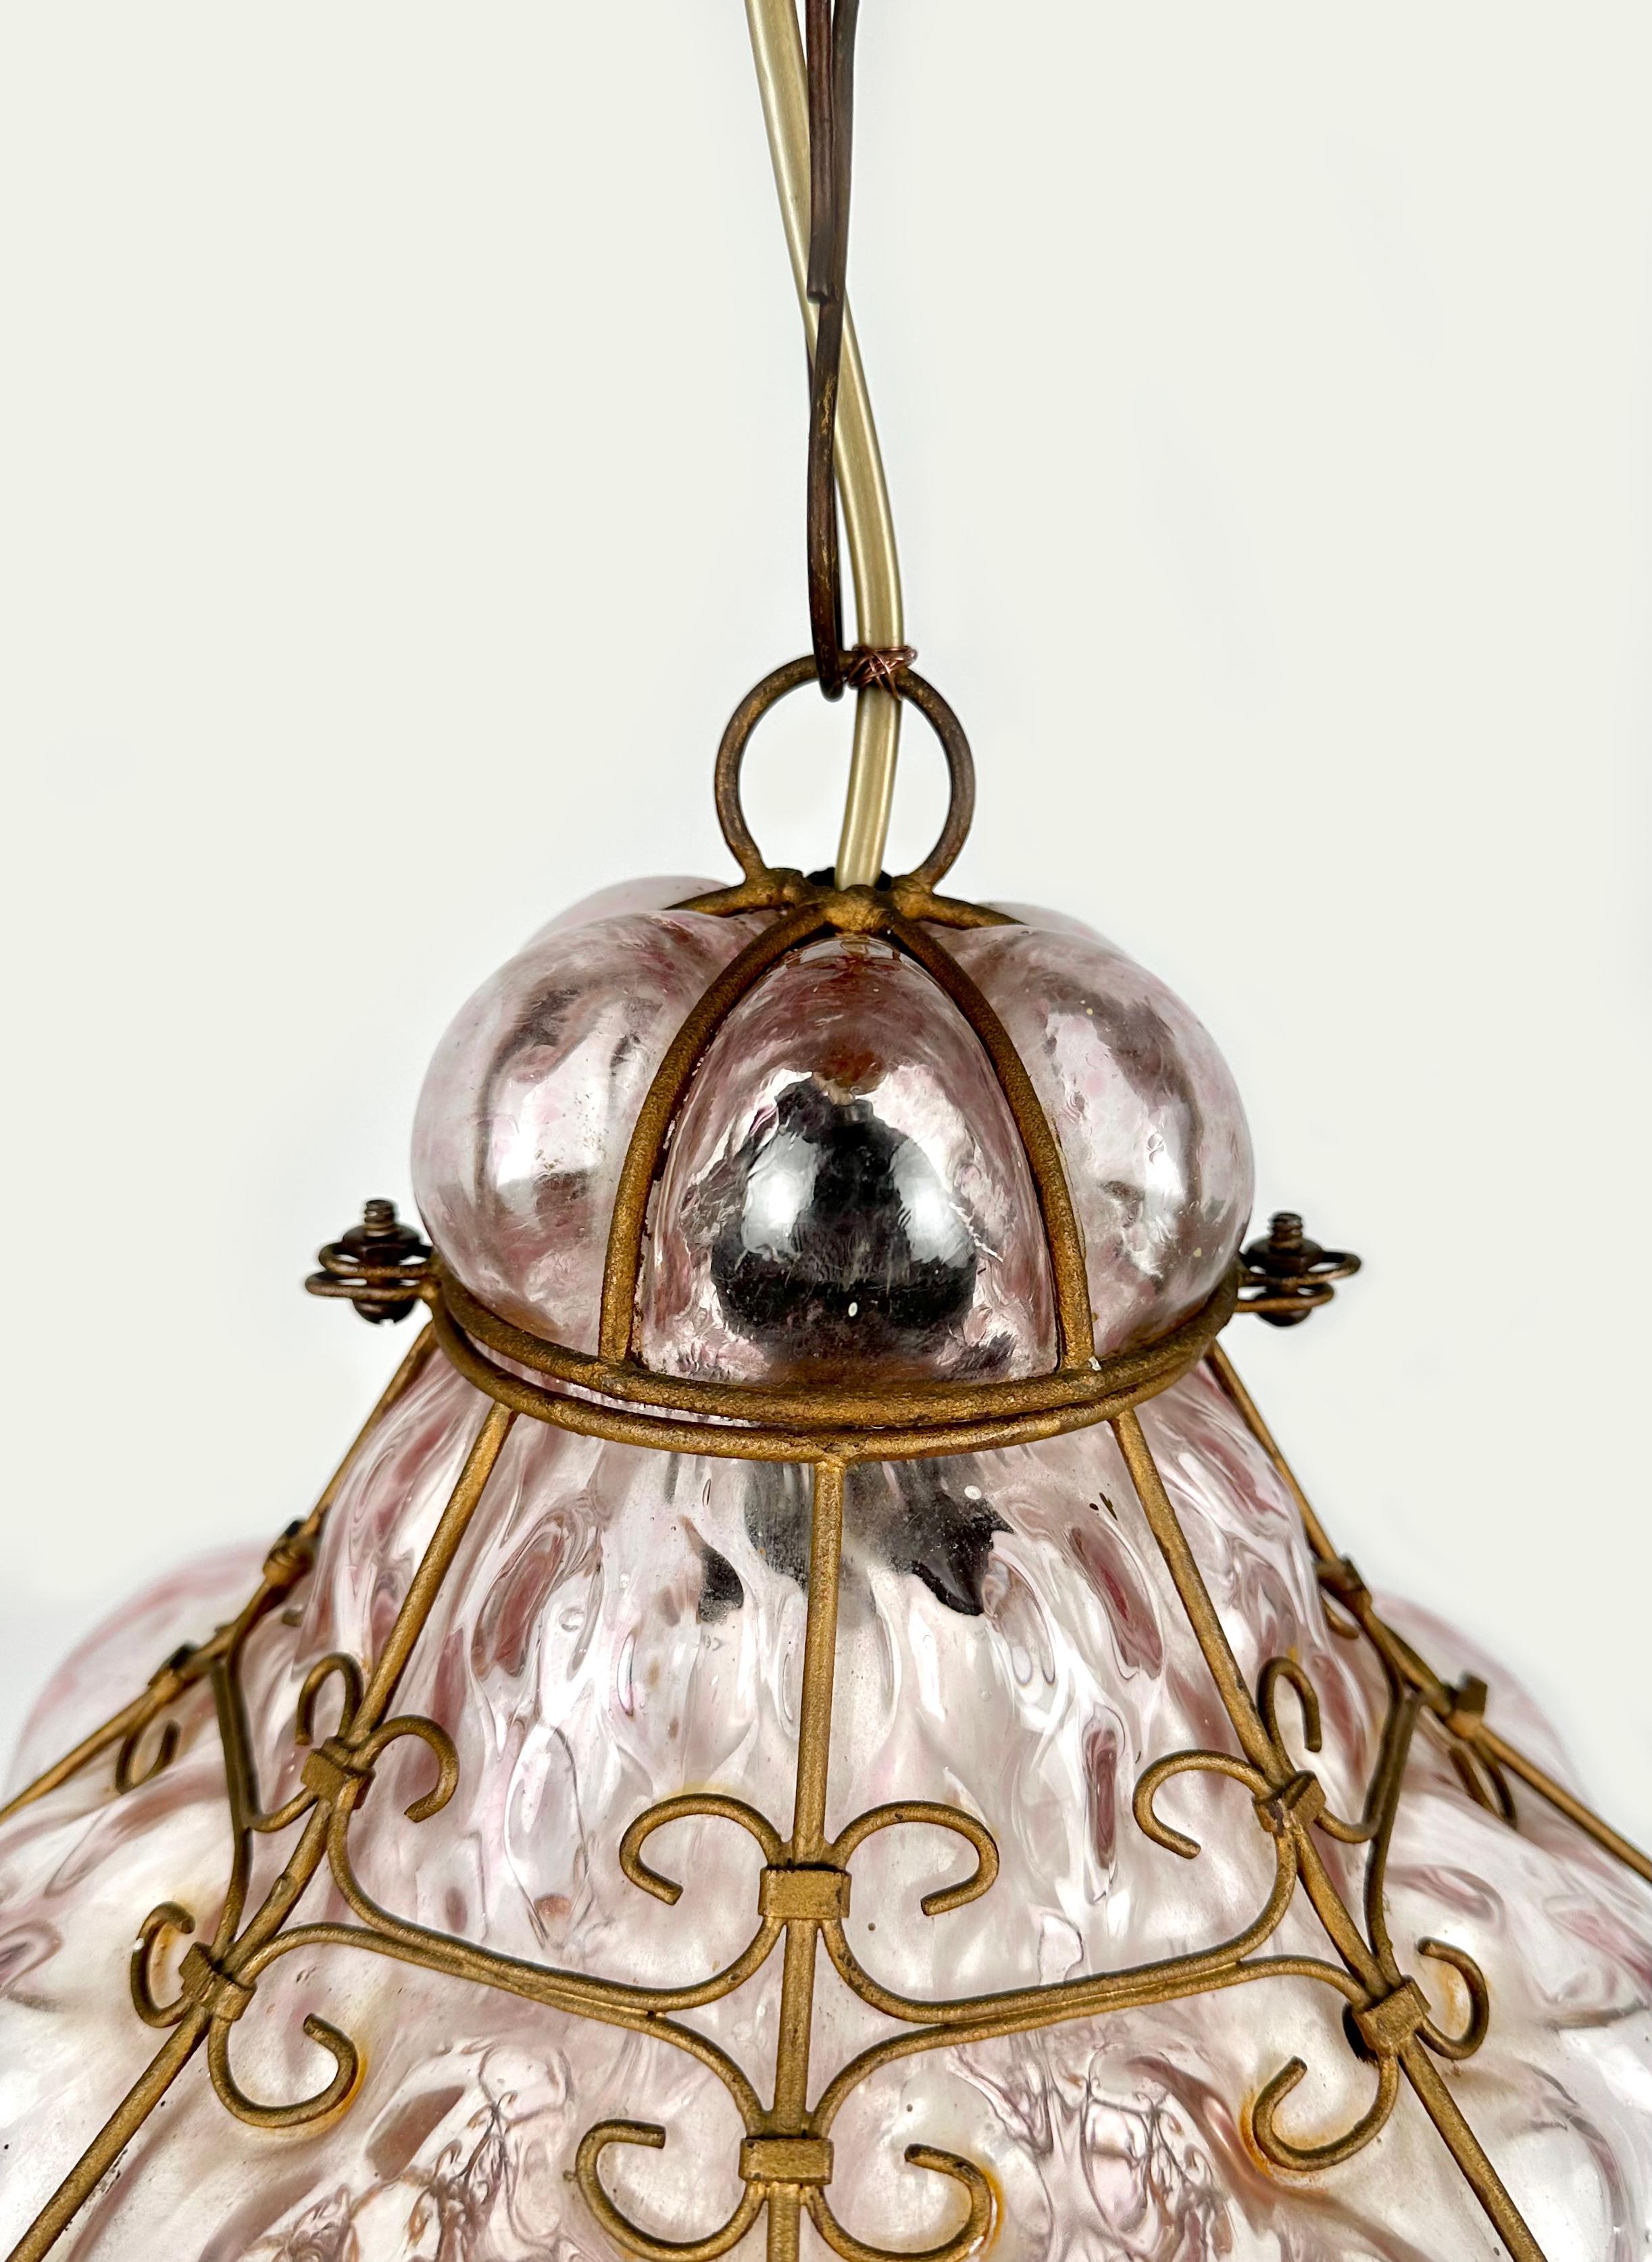 Midcentury Handblown Murano Pink Glass Pendant Light by Seguso, Italy, 1940s For Sale 2